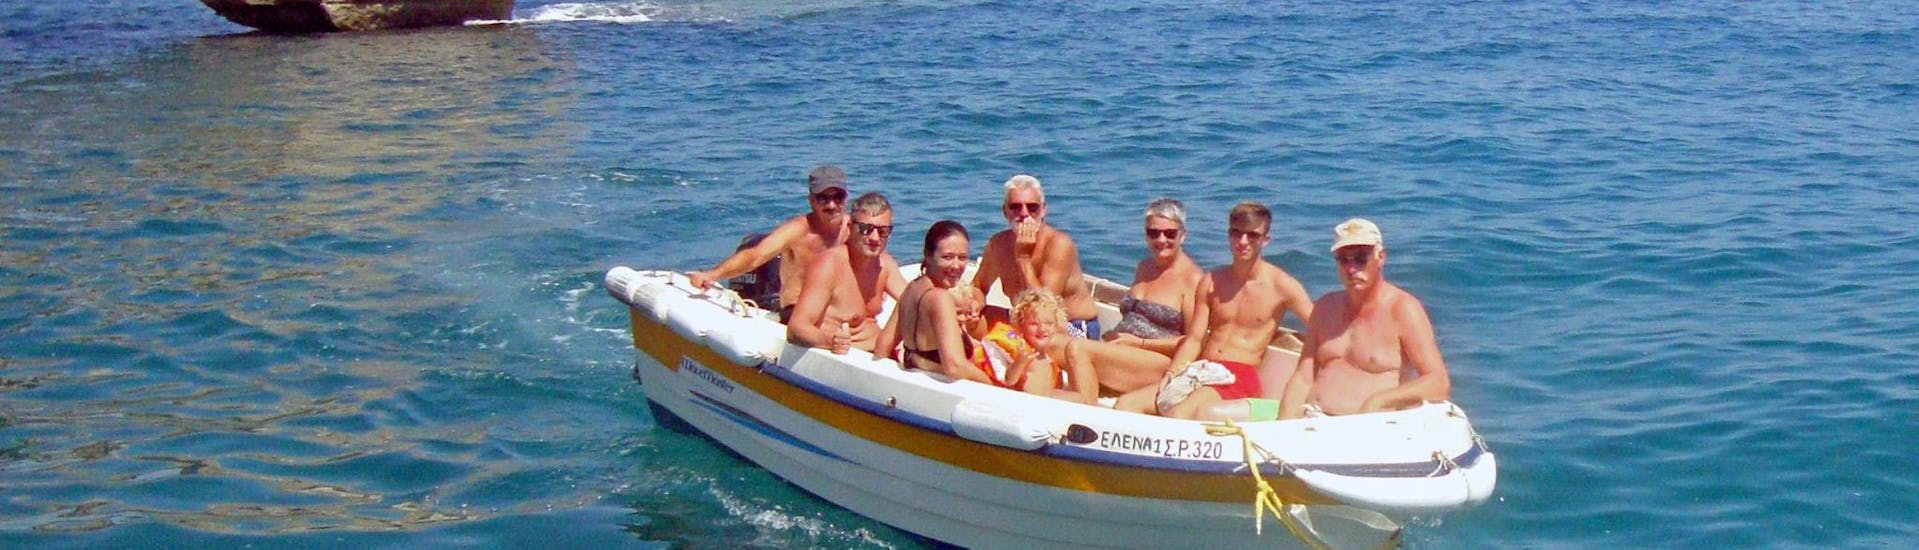 Le persone sulla barca durante il The Skippers - Boats & Water Sports Bali with The Skippers - Boats & Water Sports Bali.